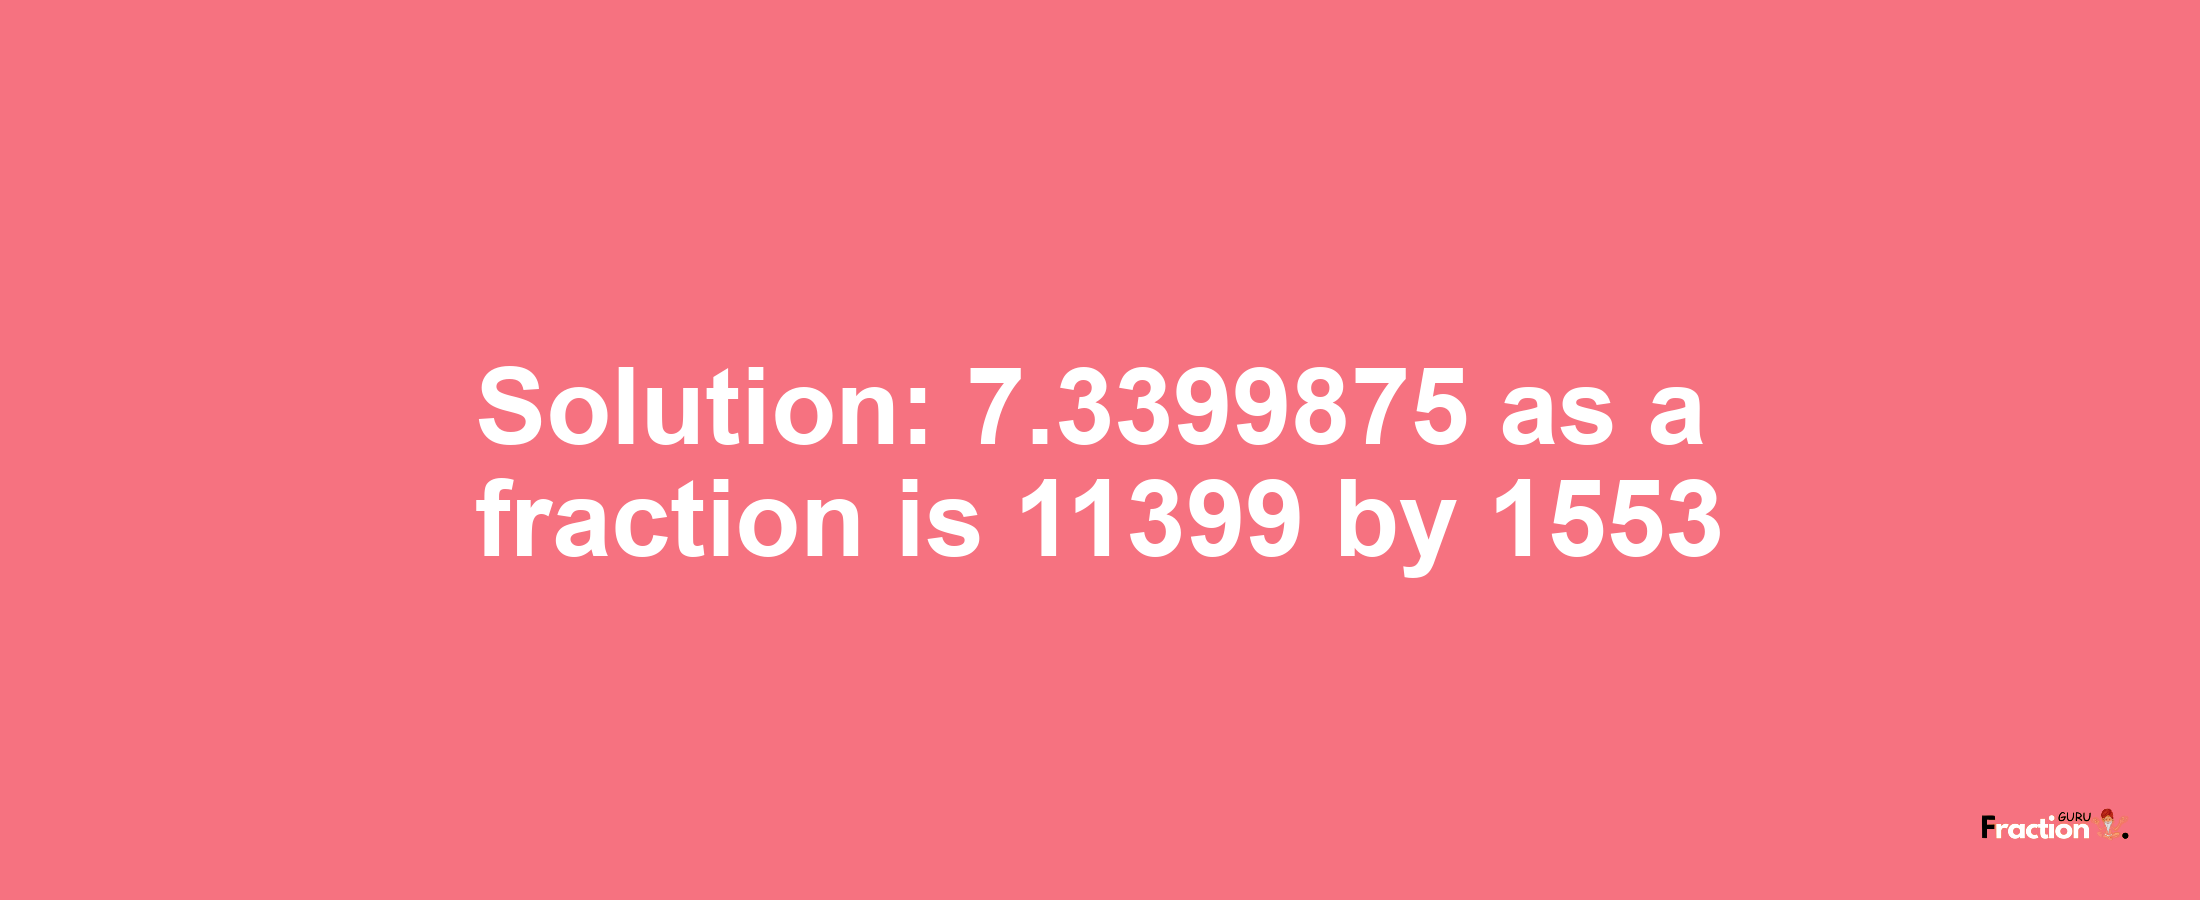 Solution:7.3399875 as a fraction is 11399/1553